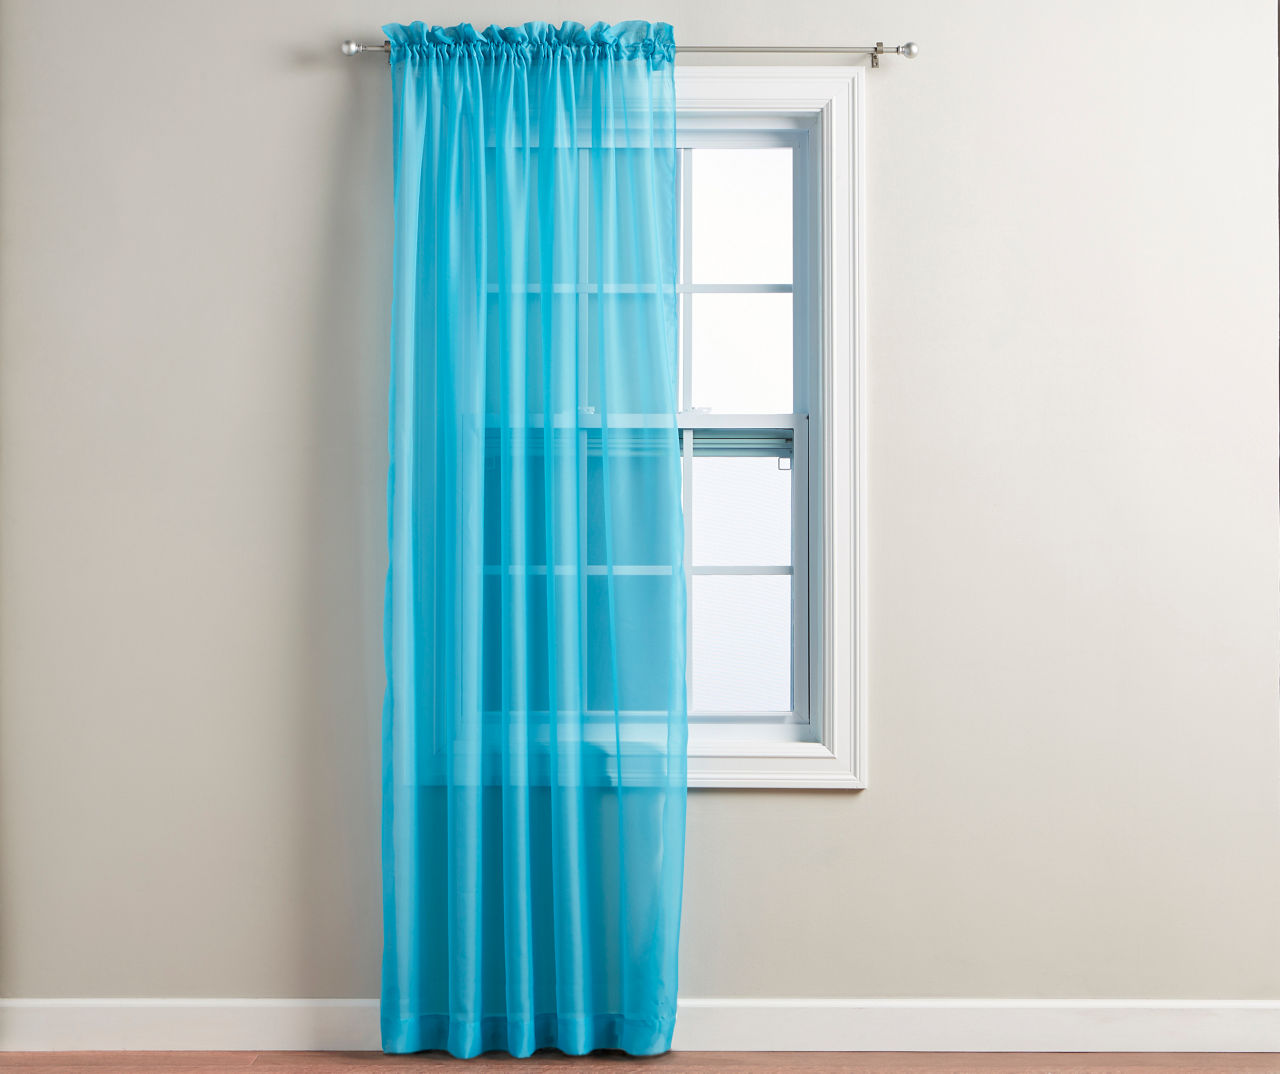 Turquoise Voile Sheer Curtain Panel, (84")